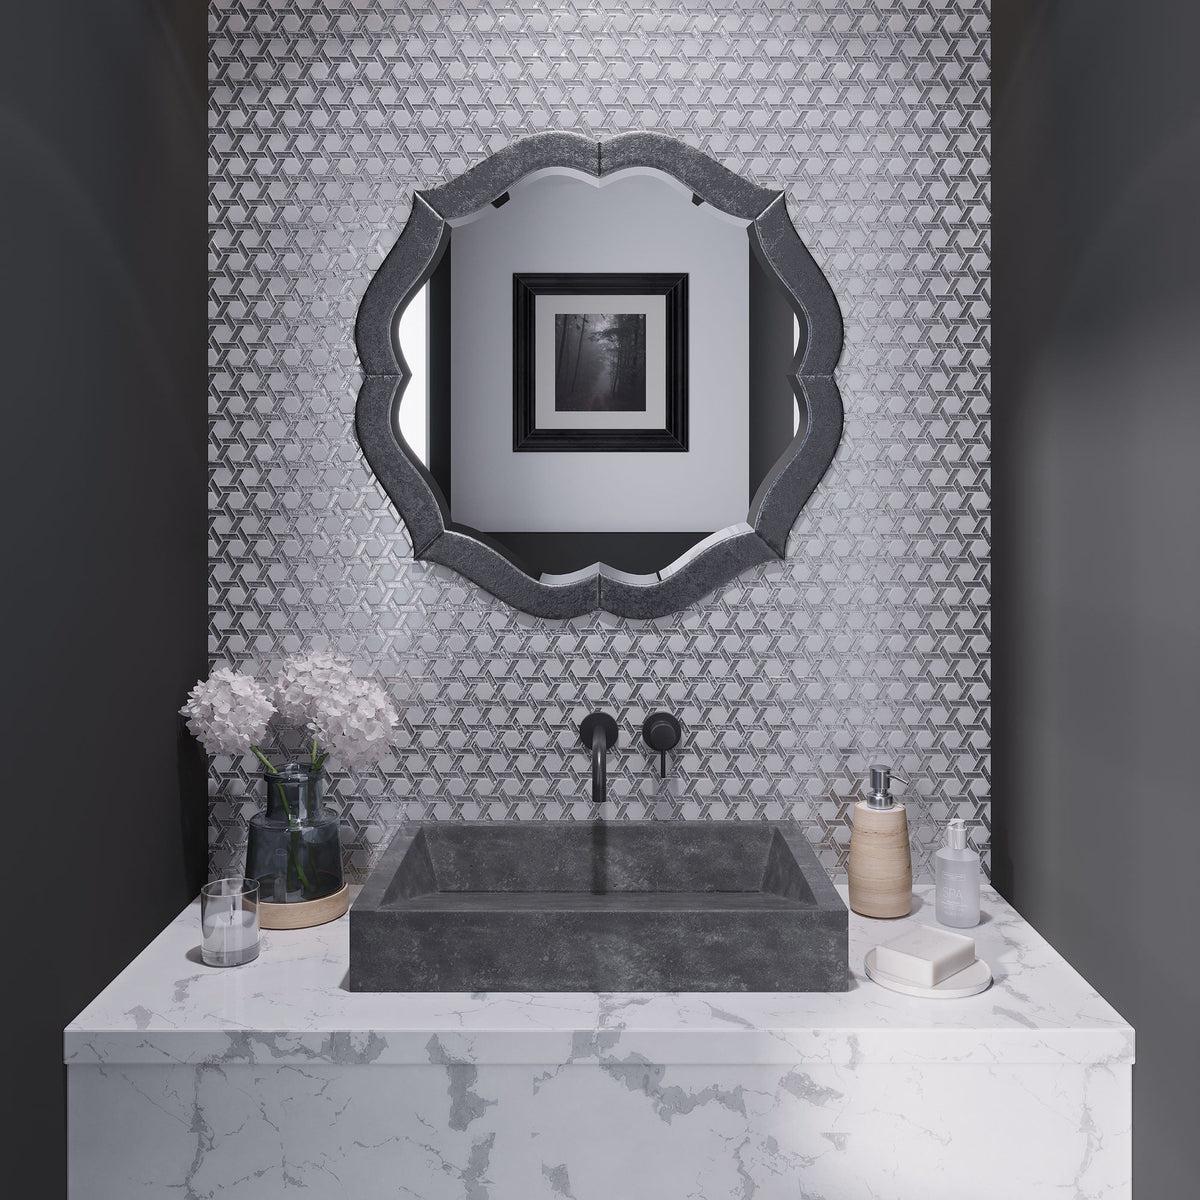 Small modern bathroom with silver and gray glass wall tile